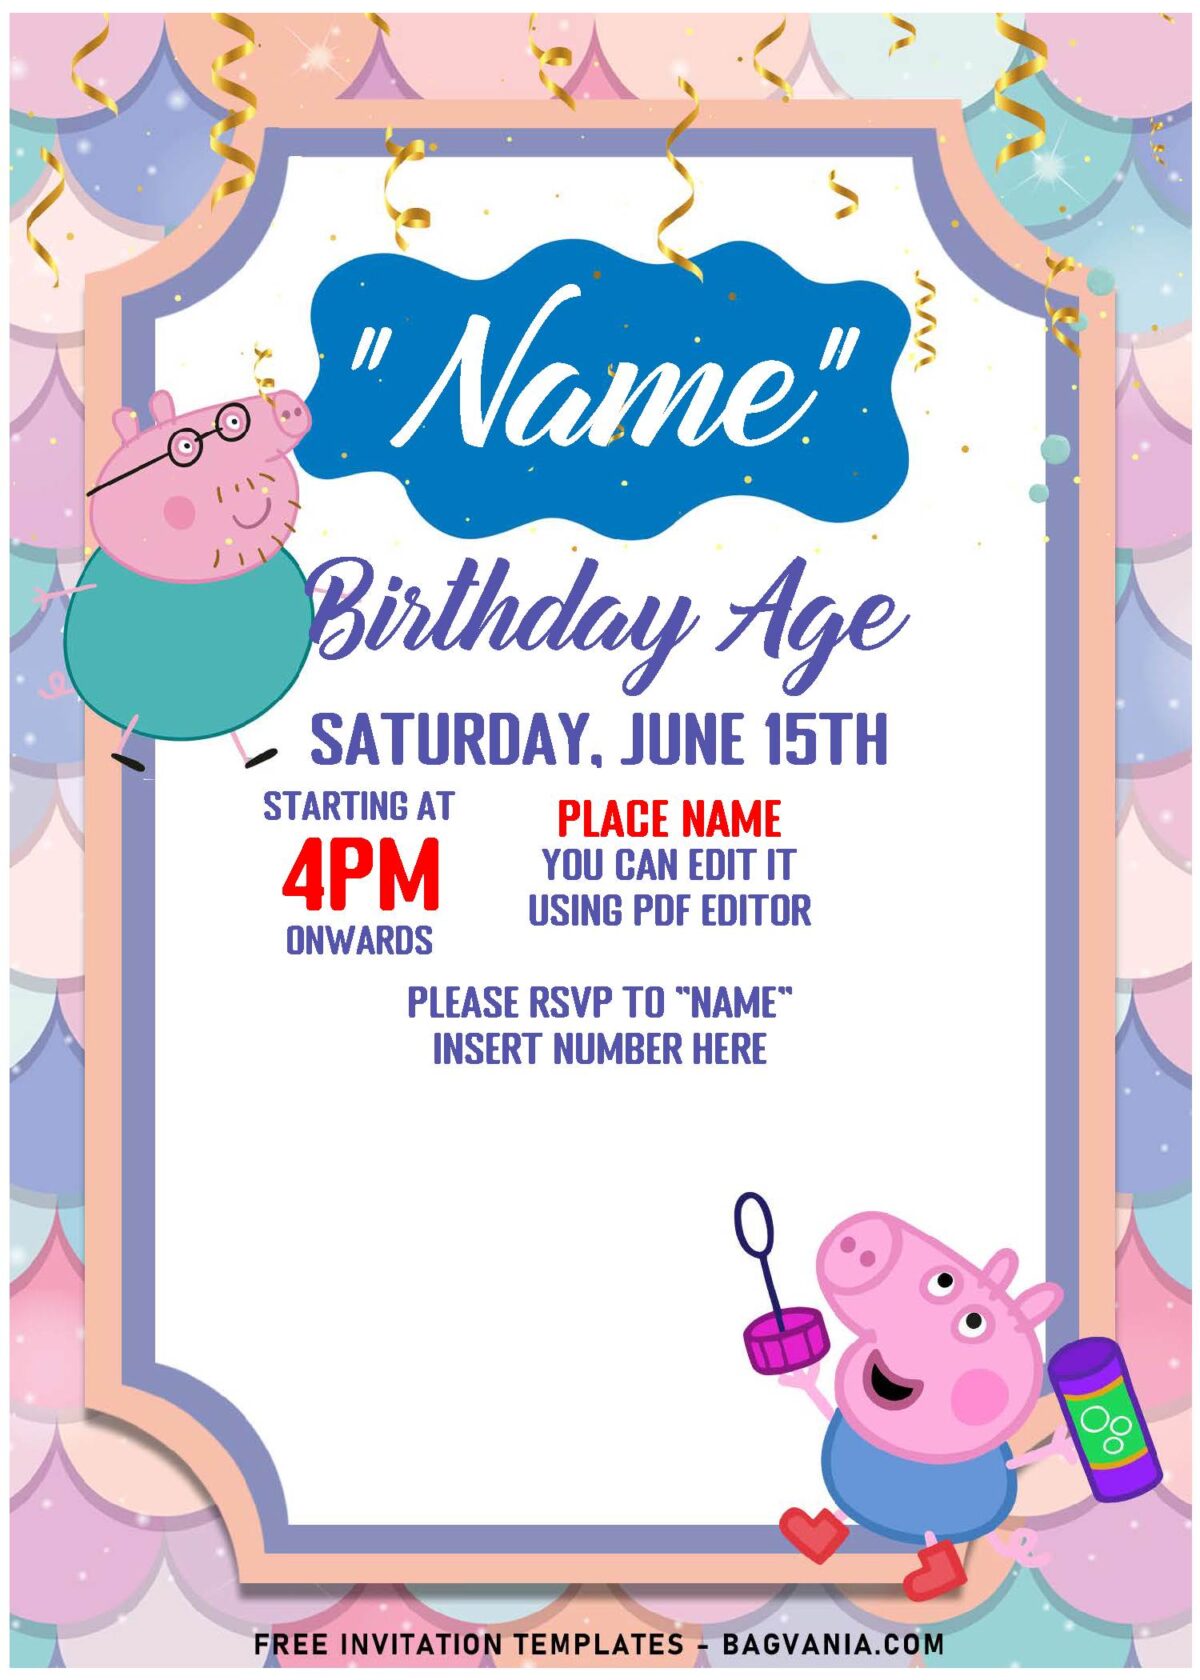 (Free Editable PDF) Peppa Pig Party Time Birthday Invitation Templates with lovely cute pink pattern